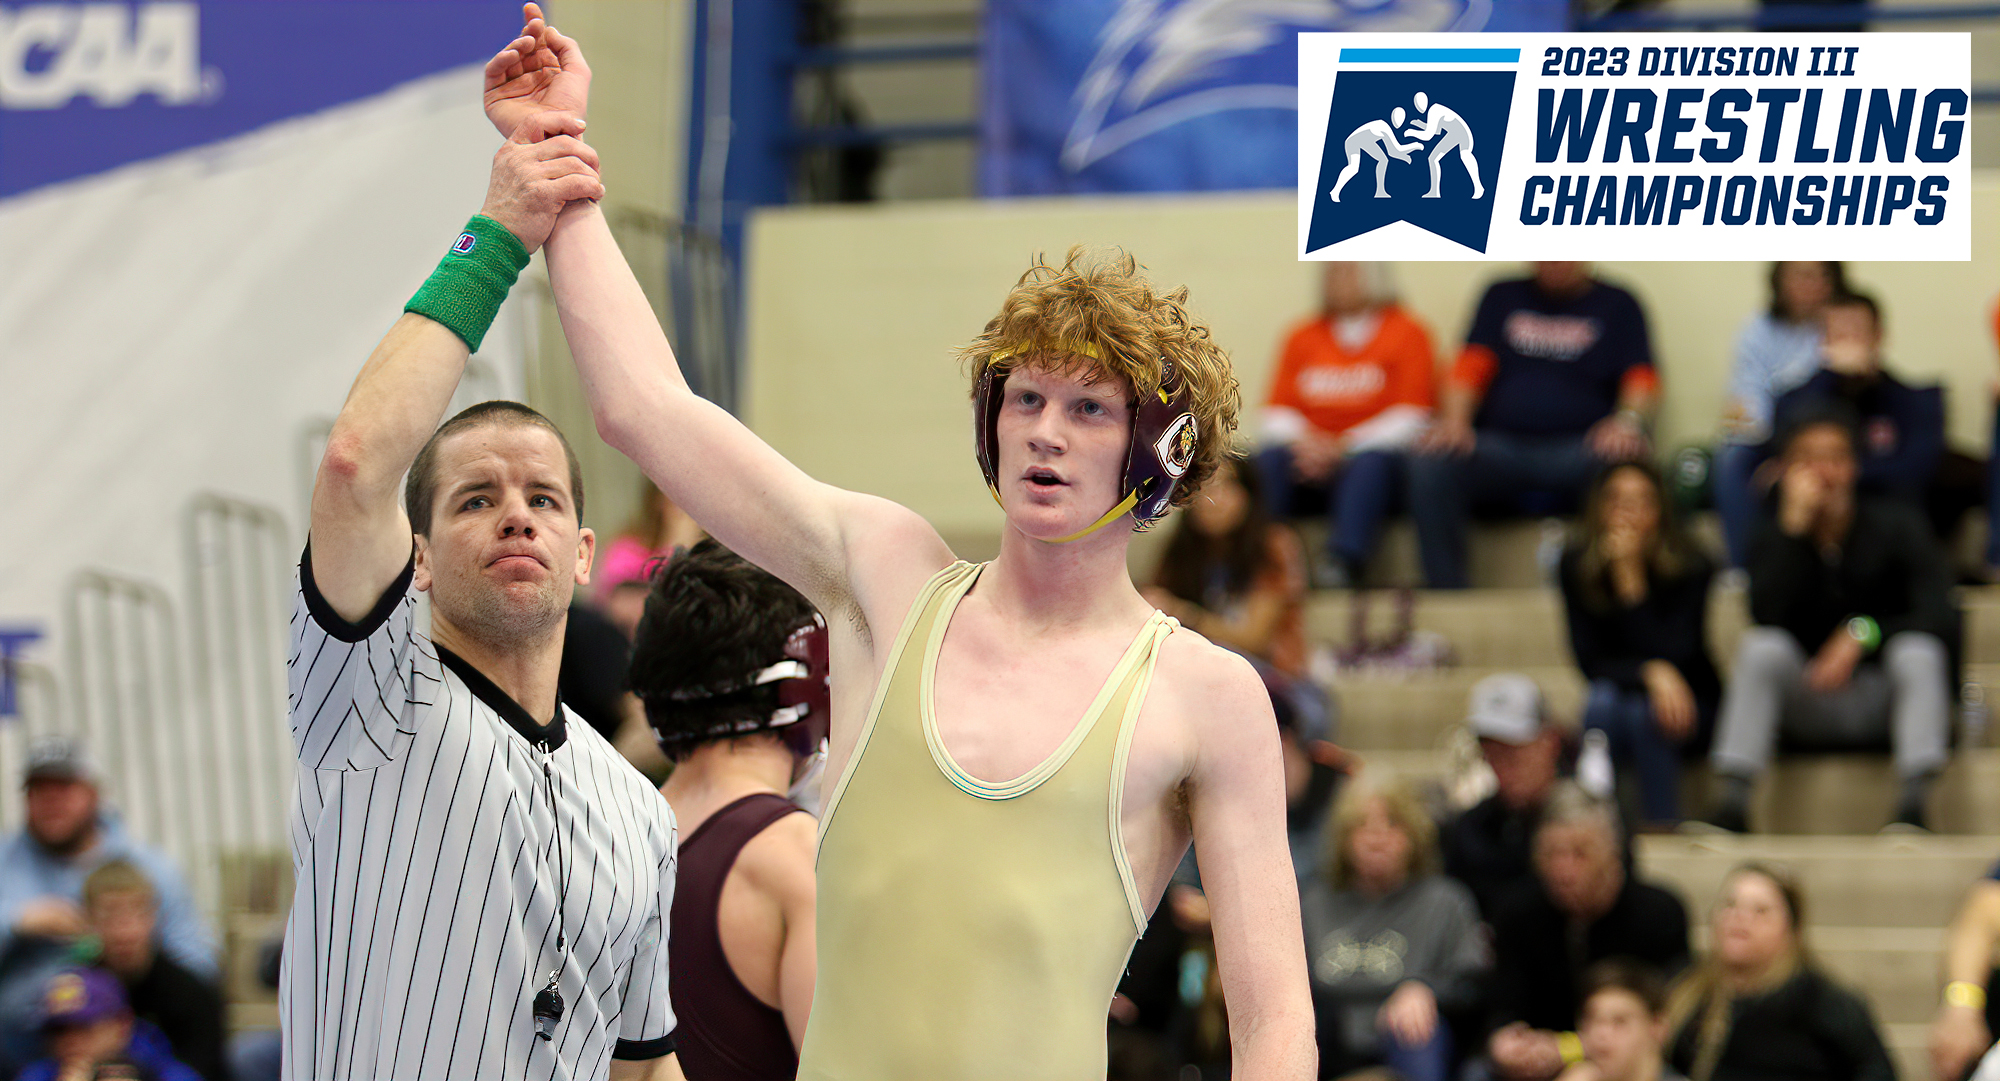 Ty Bisek has his hand raised in victory after winning the 3rd-place match at the NCAA Regional Meet which earned him a spot at nationals.